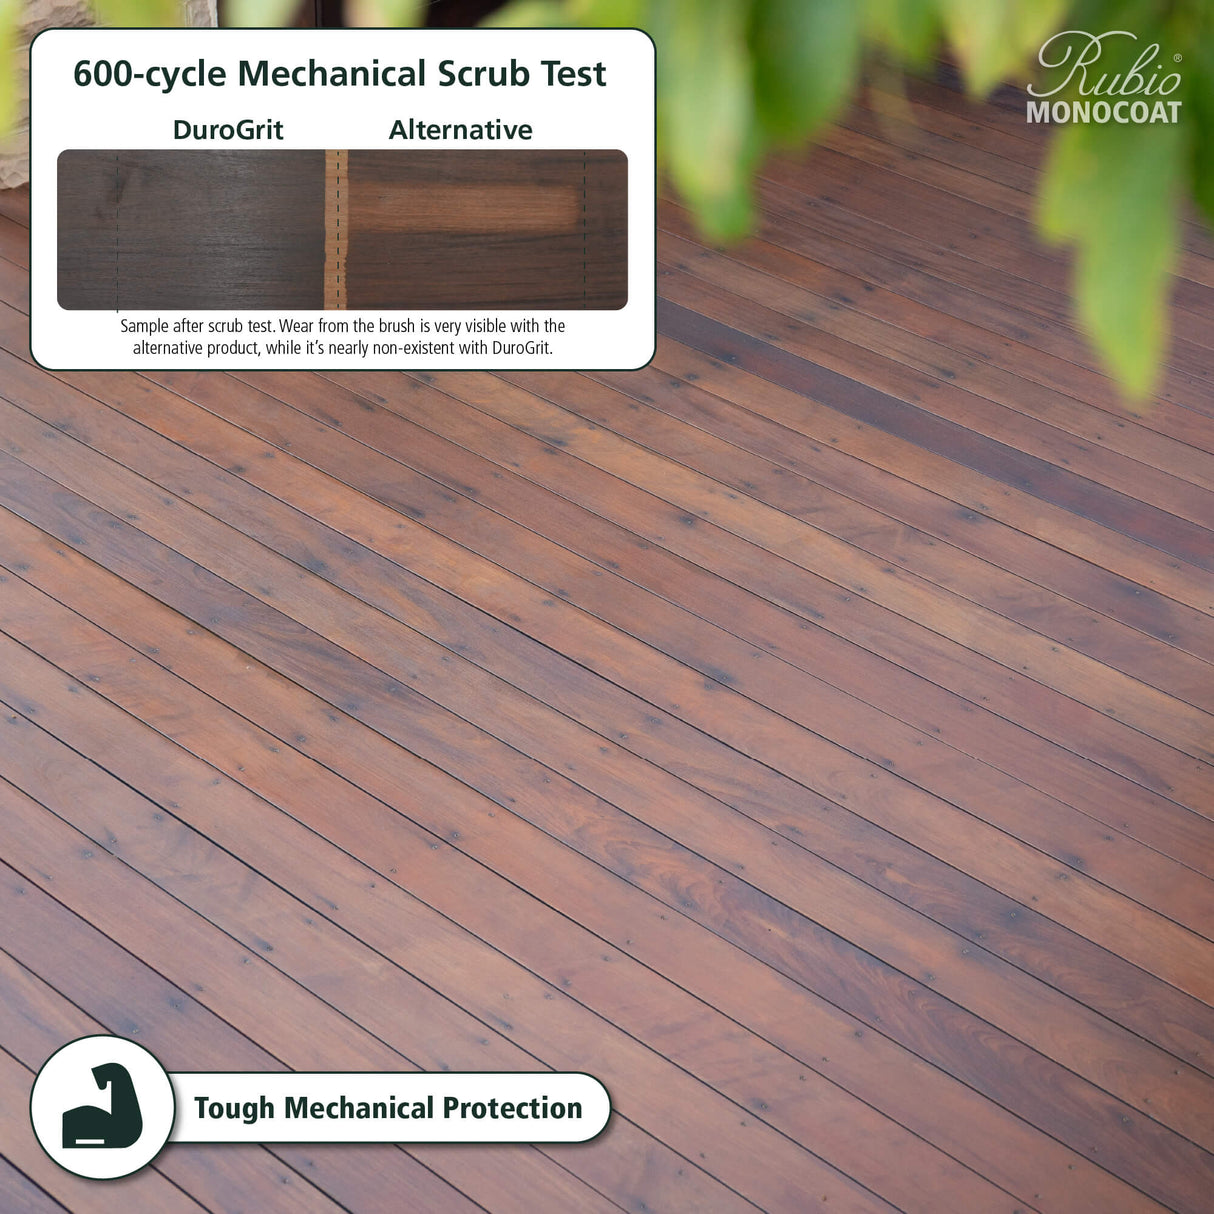 DuroGrit provides tough mechanical protection on exterior wood